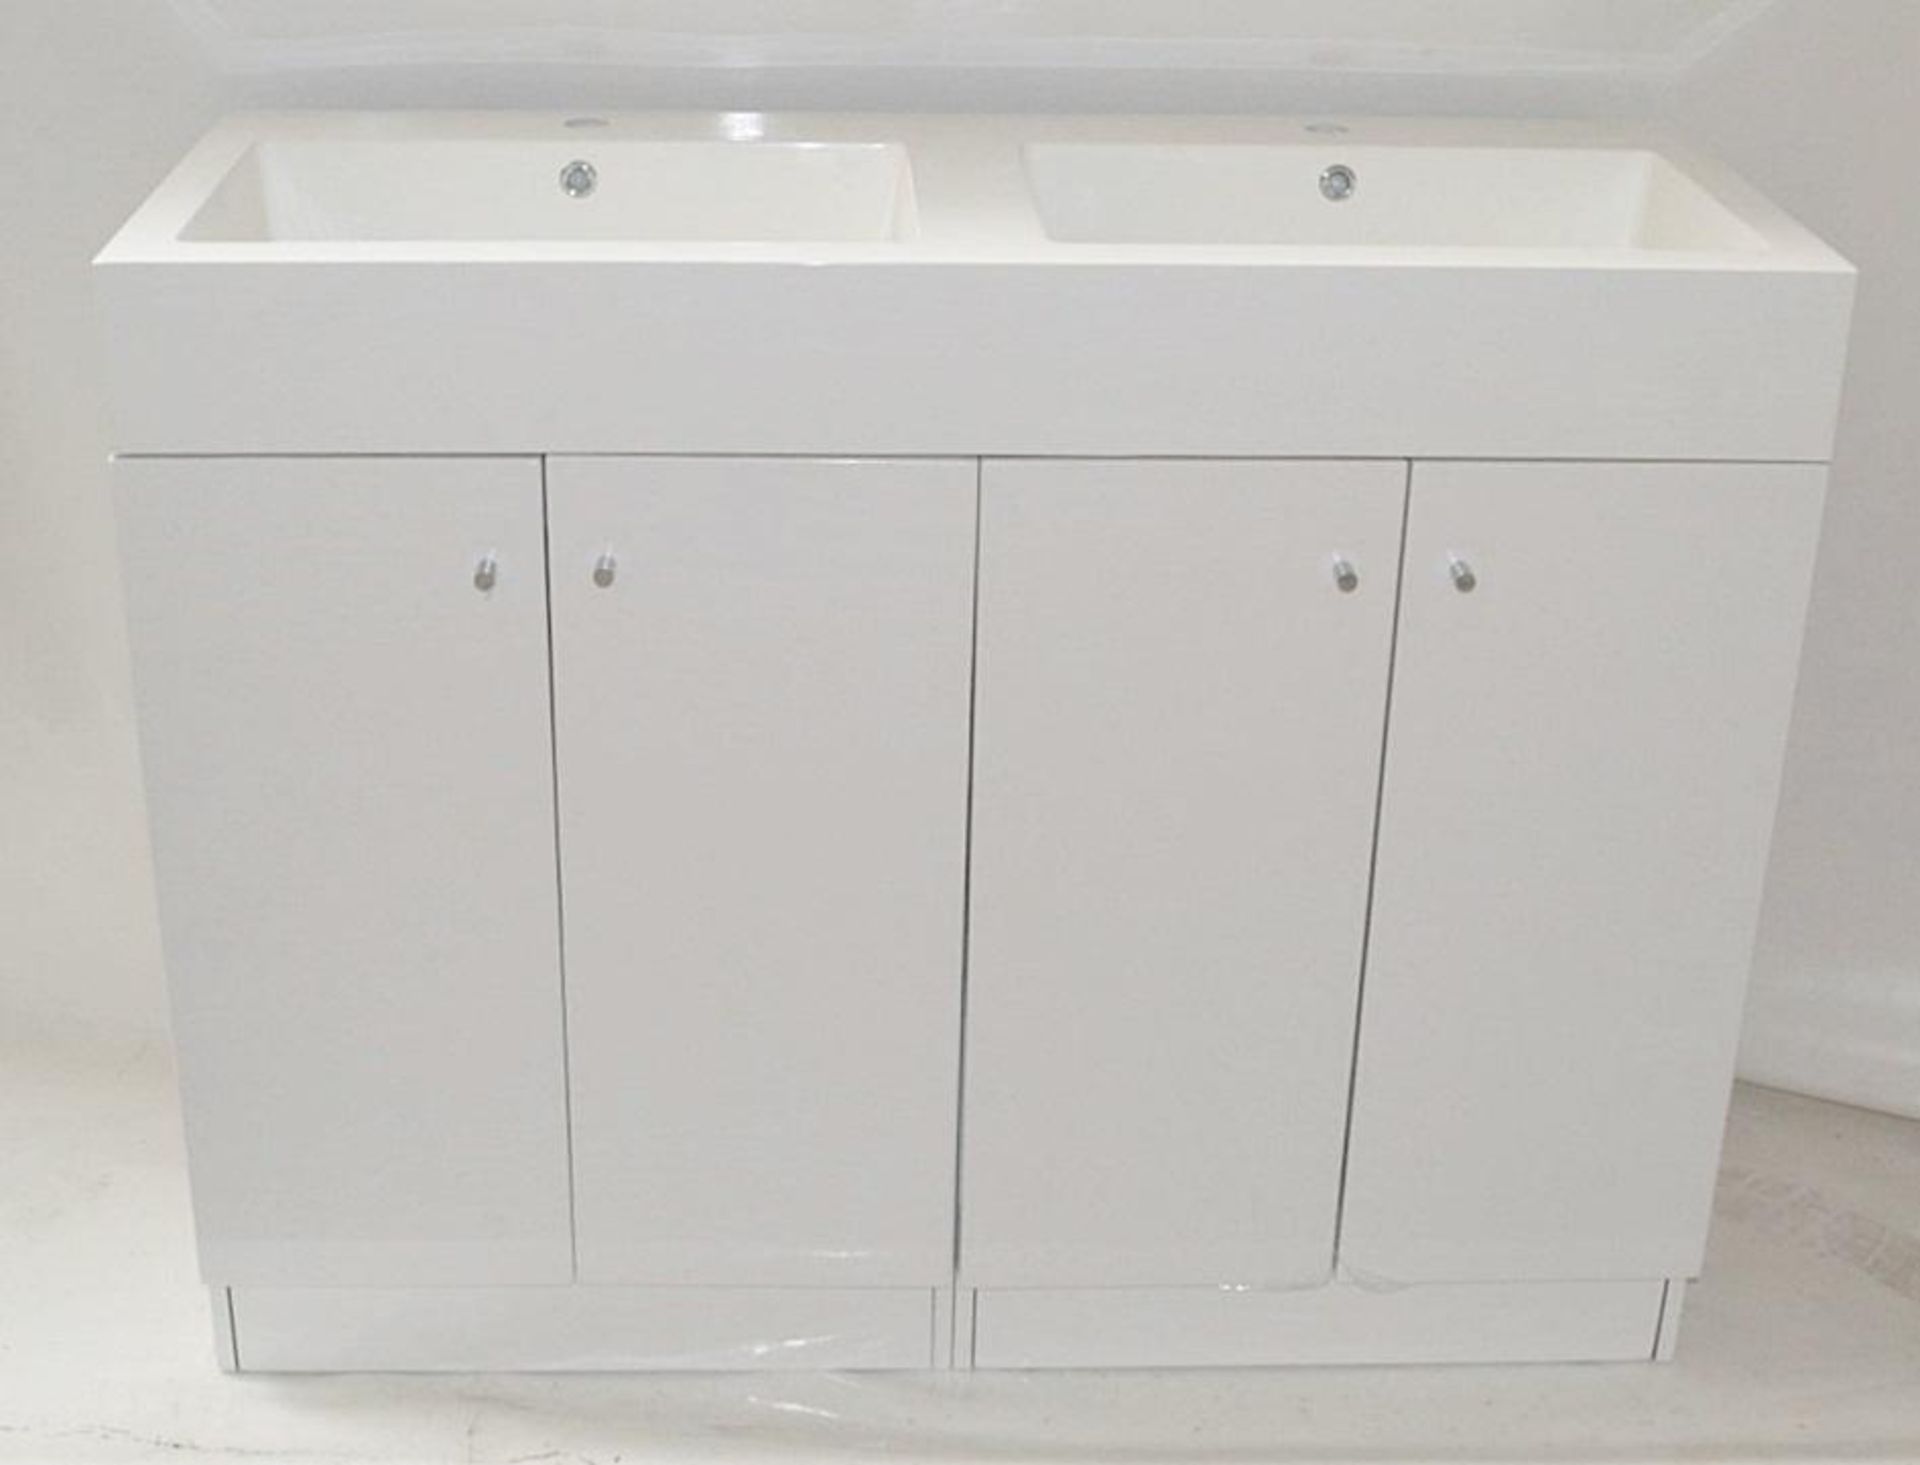 1 x His & Hers Double Bathroom Vanity Unit - 1200mm Wide - Features a High Gloss White Finish and